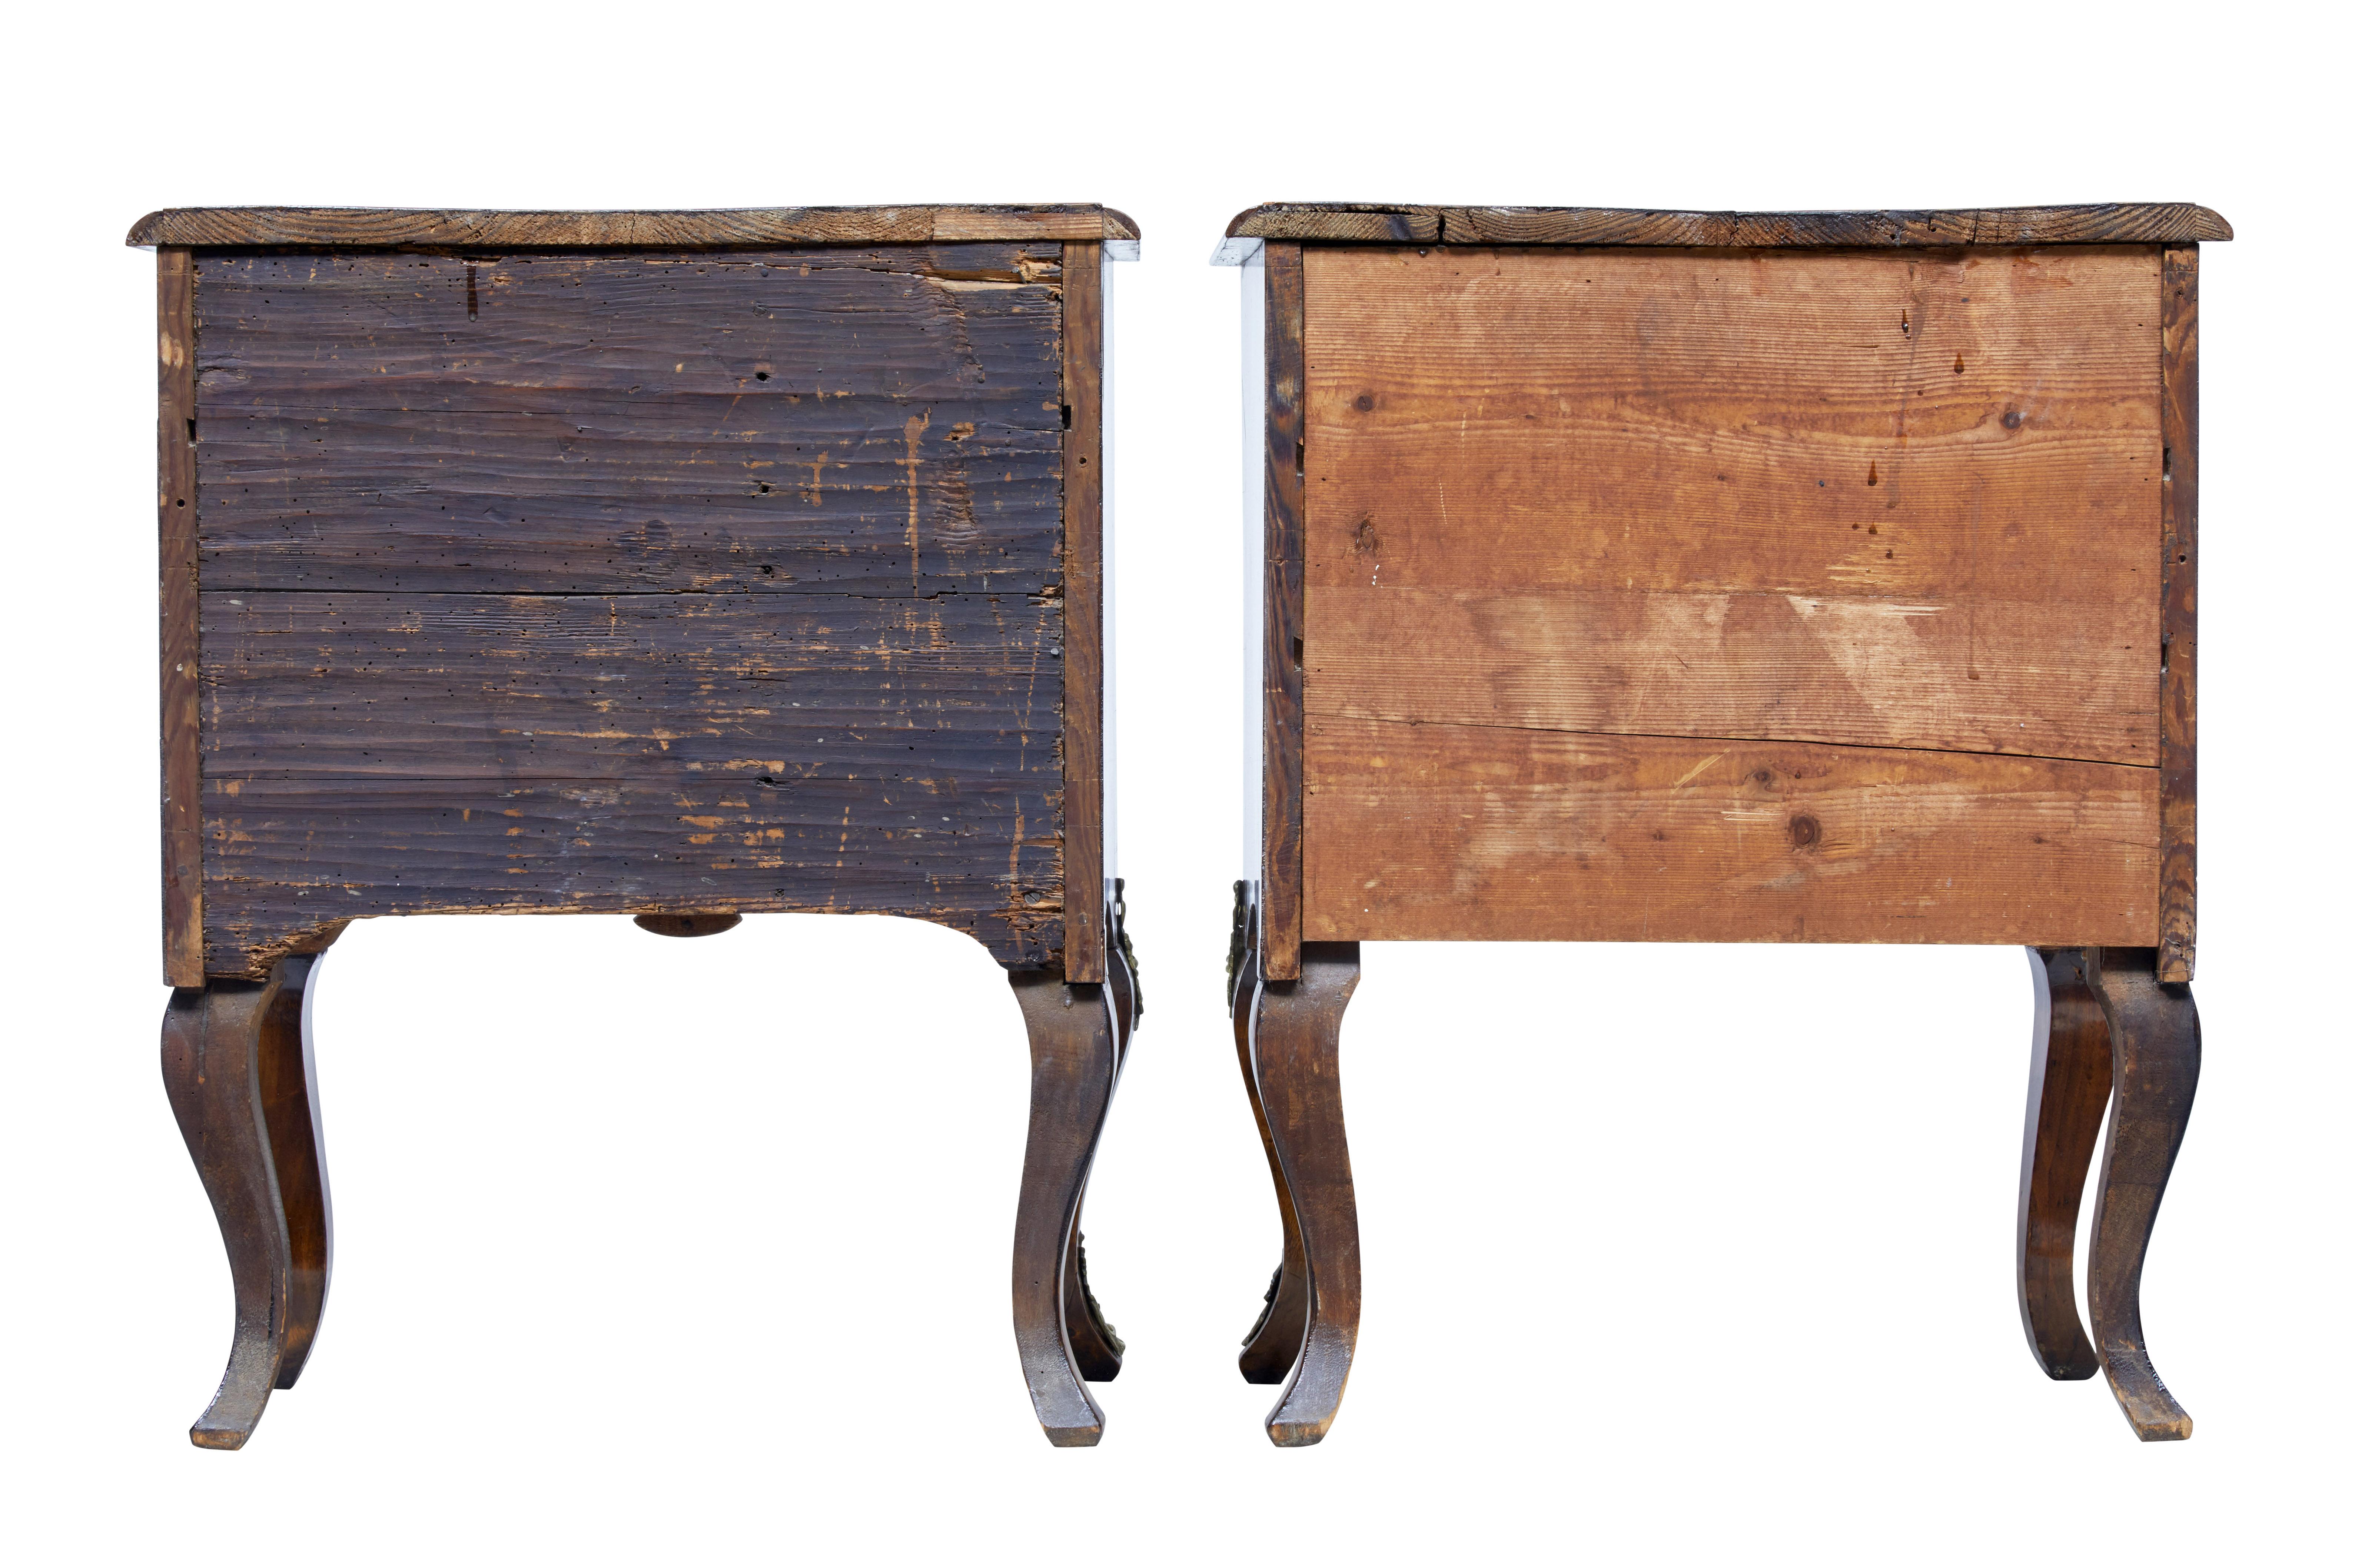 German Pair of Small Mid-19th Century Continental Walnut Commodes